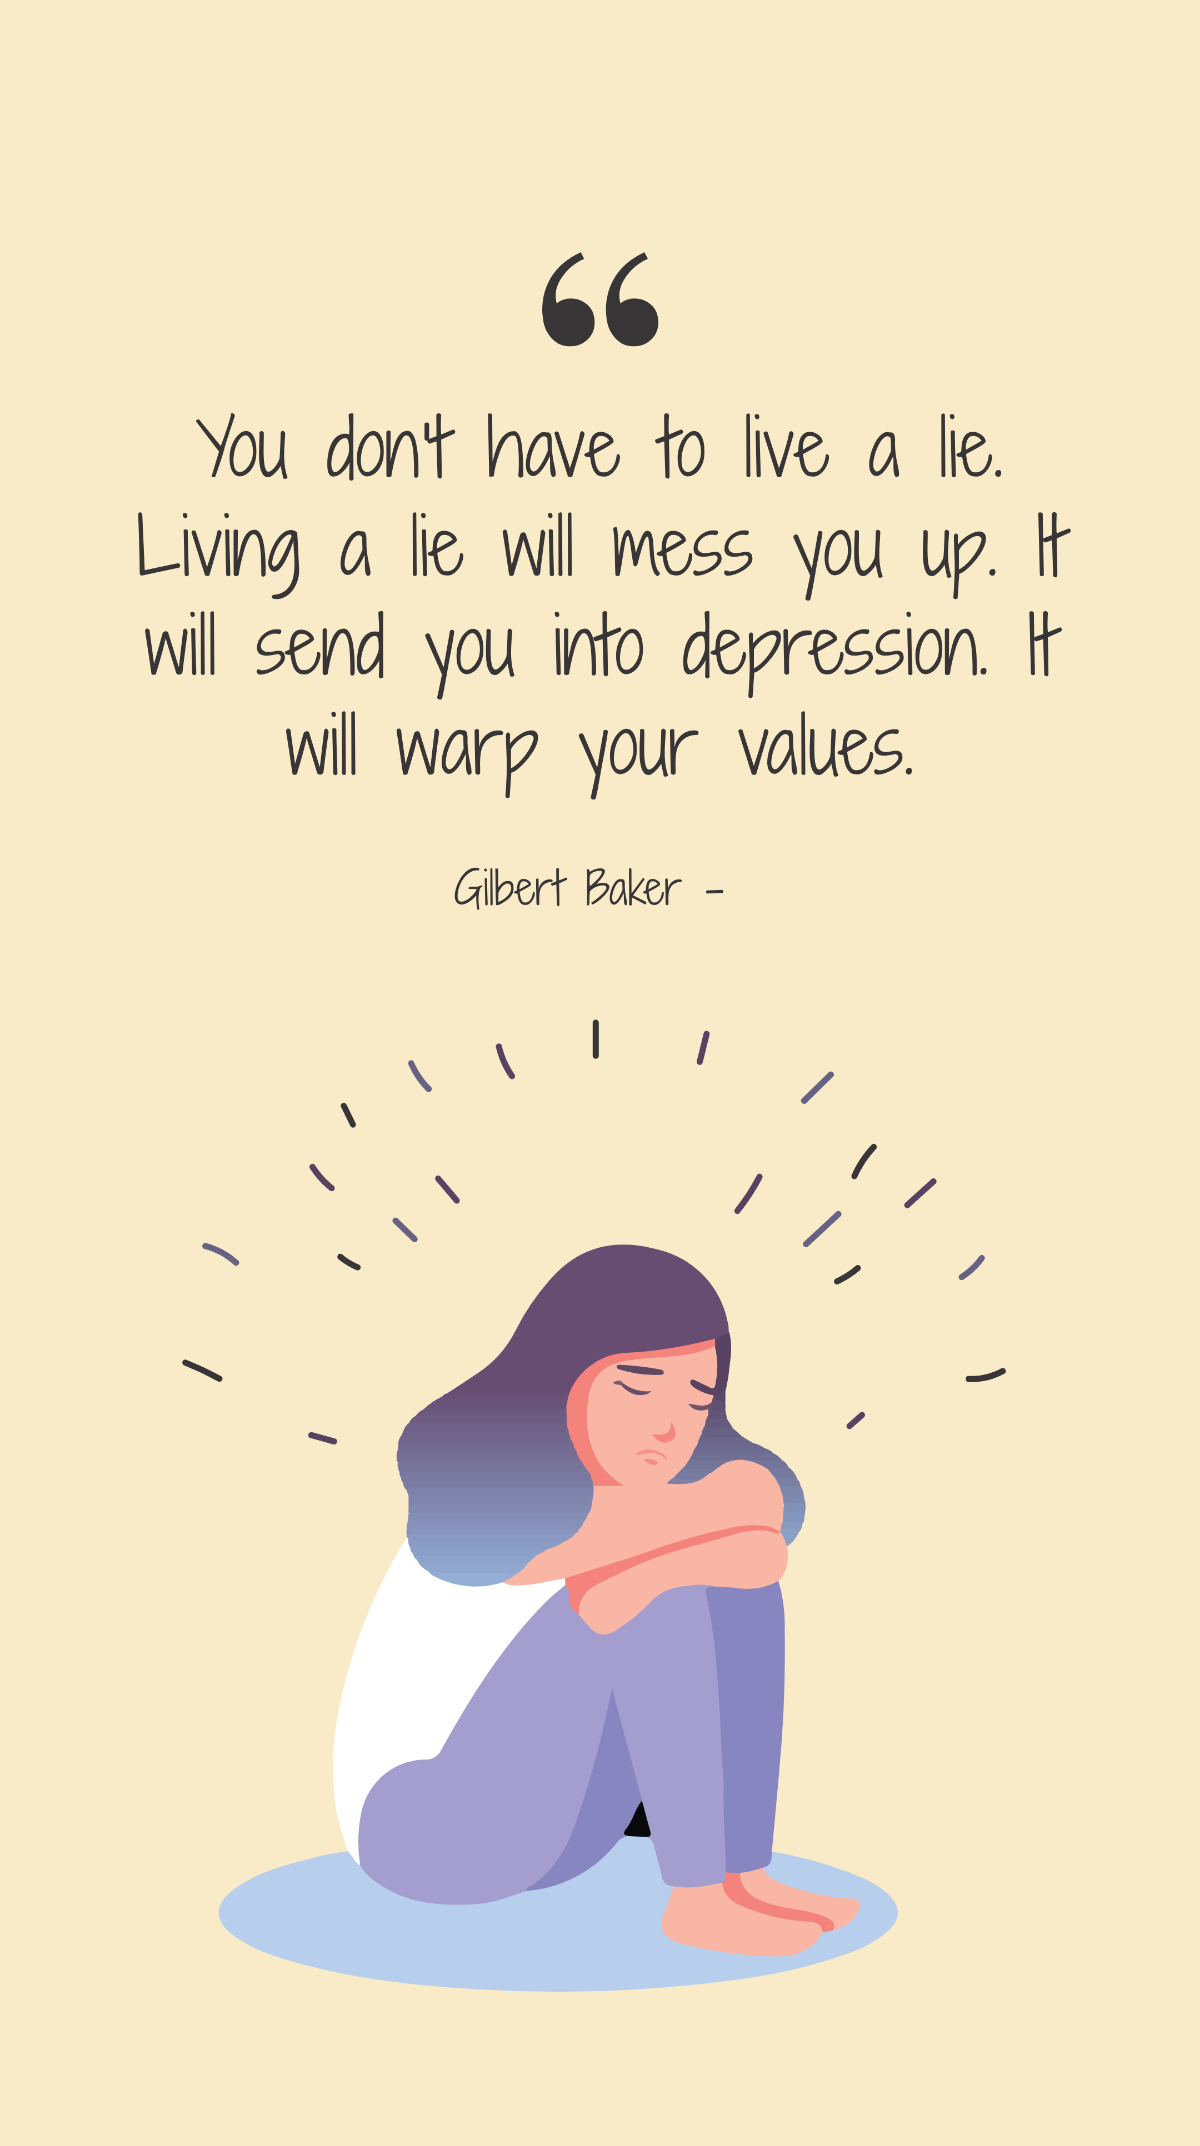 Gilbert Baker - You don't have to live a lie. Living a lie will mess you up. It will send you into depression. It will warp your values. Template